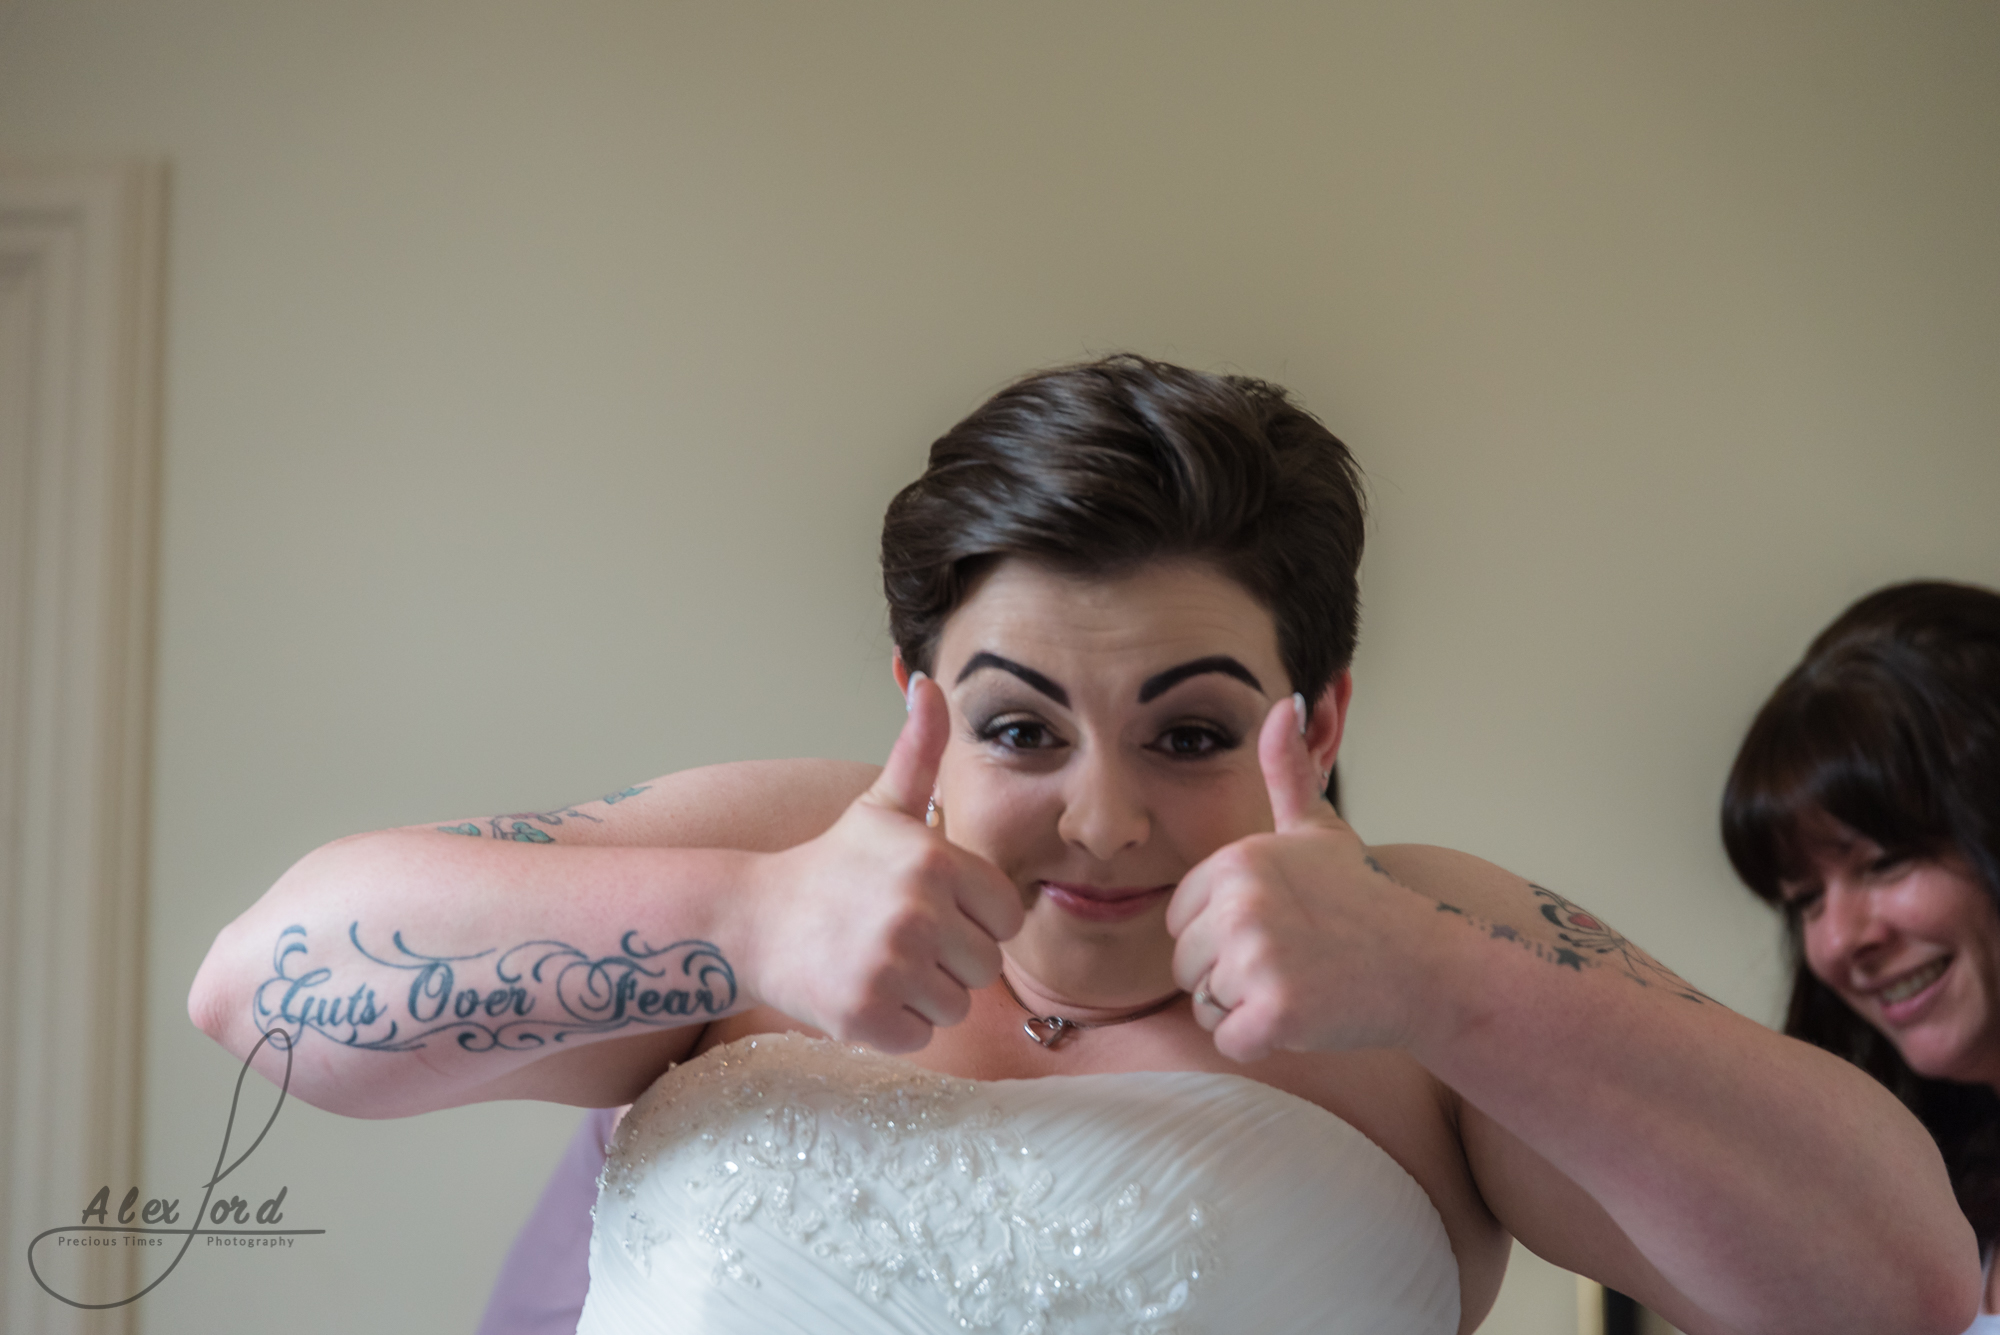 the bride does a thumbs up to the camera